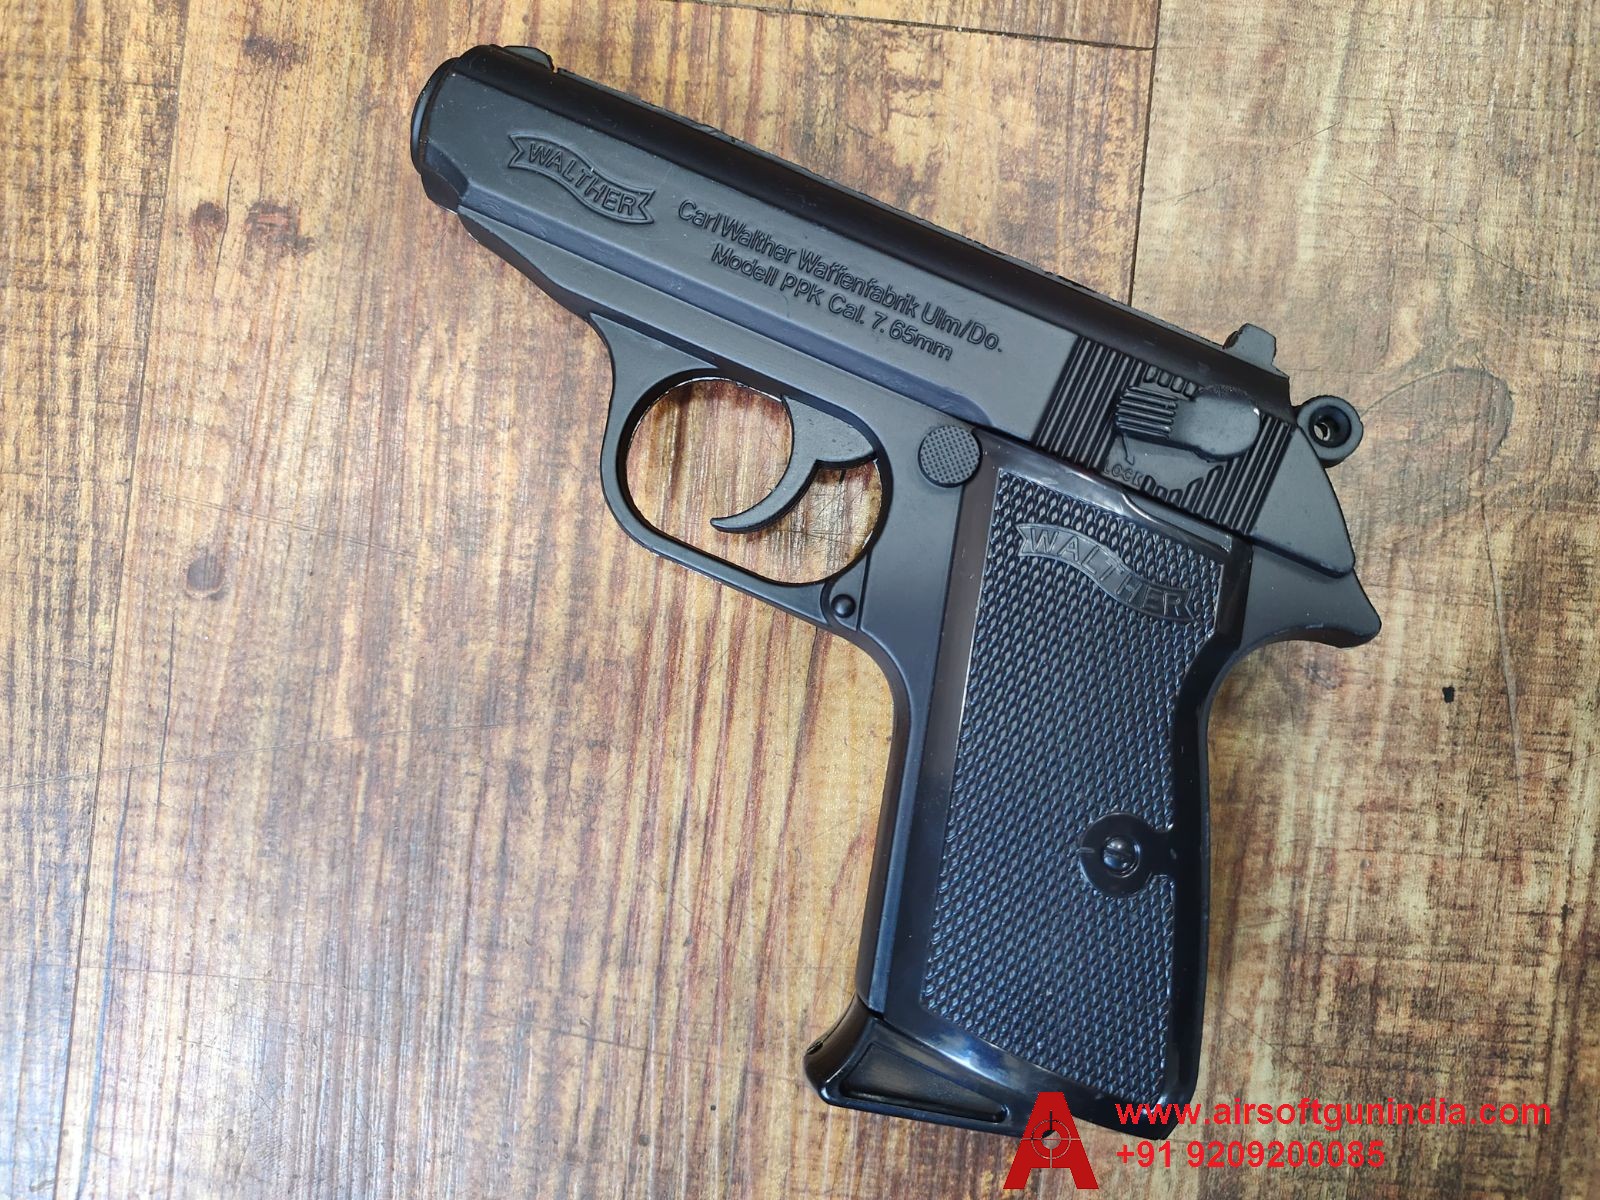 Walther PPK Black Replica Lighter By Airsoft Gun India